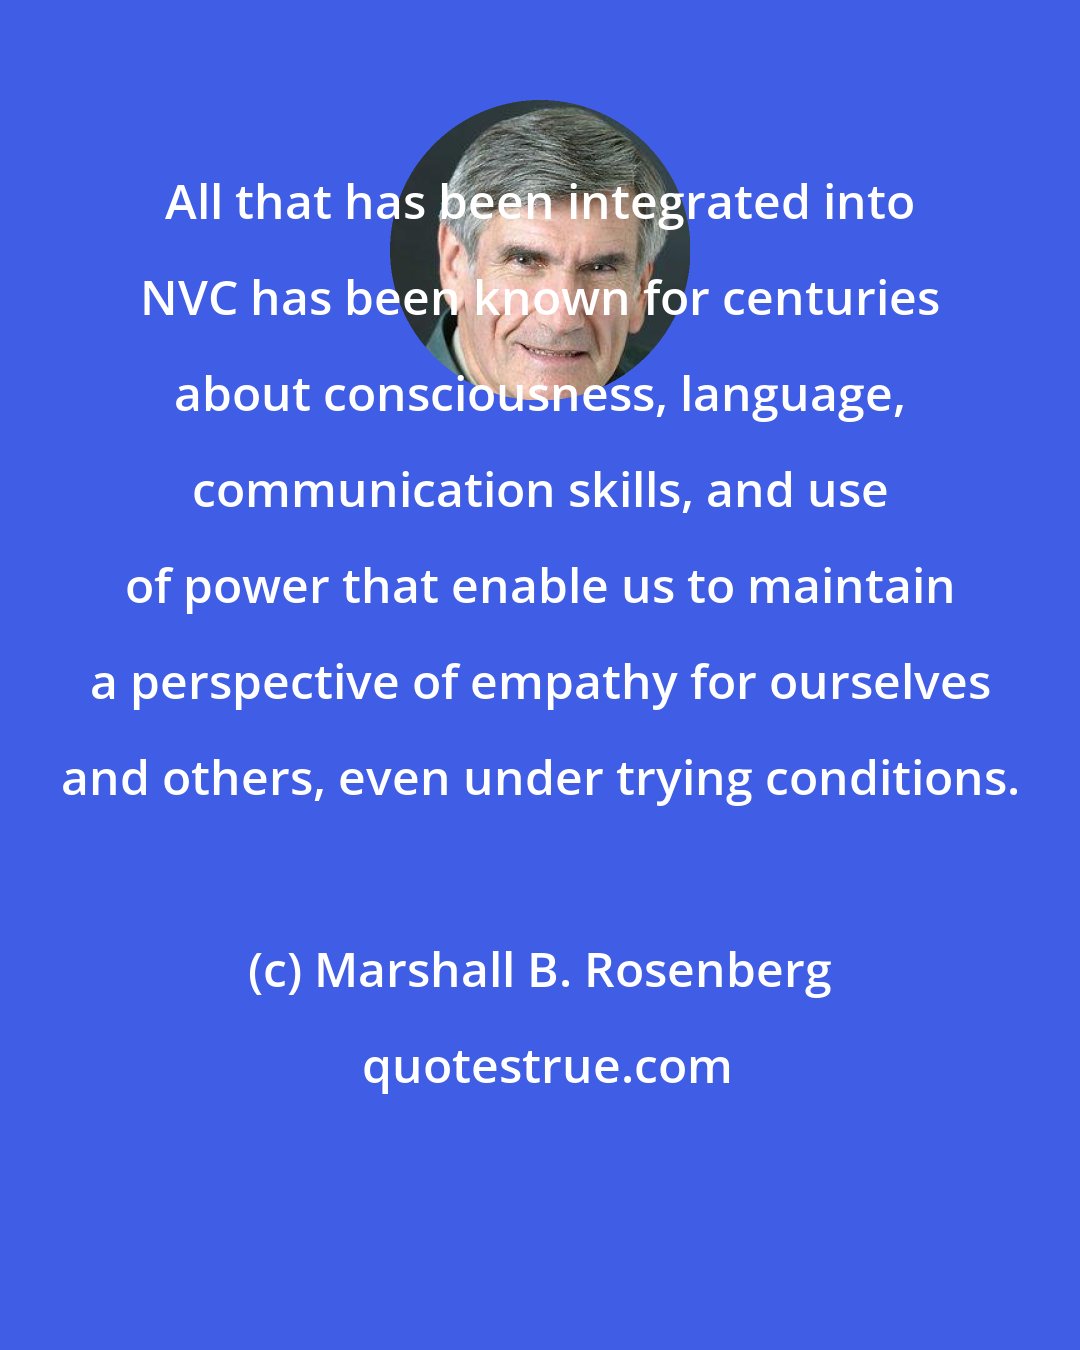 Marshall B. Rosenberg: All that has been integrated into NVC has been known for centuries about consciousness, language, communication skills, and use of power that enable us to maintain a perspective of empathy for ourselves and others, even under trying conditions.